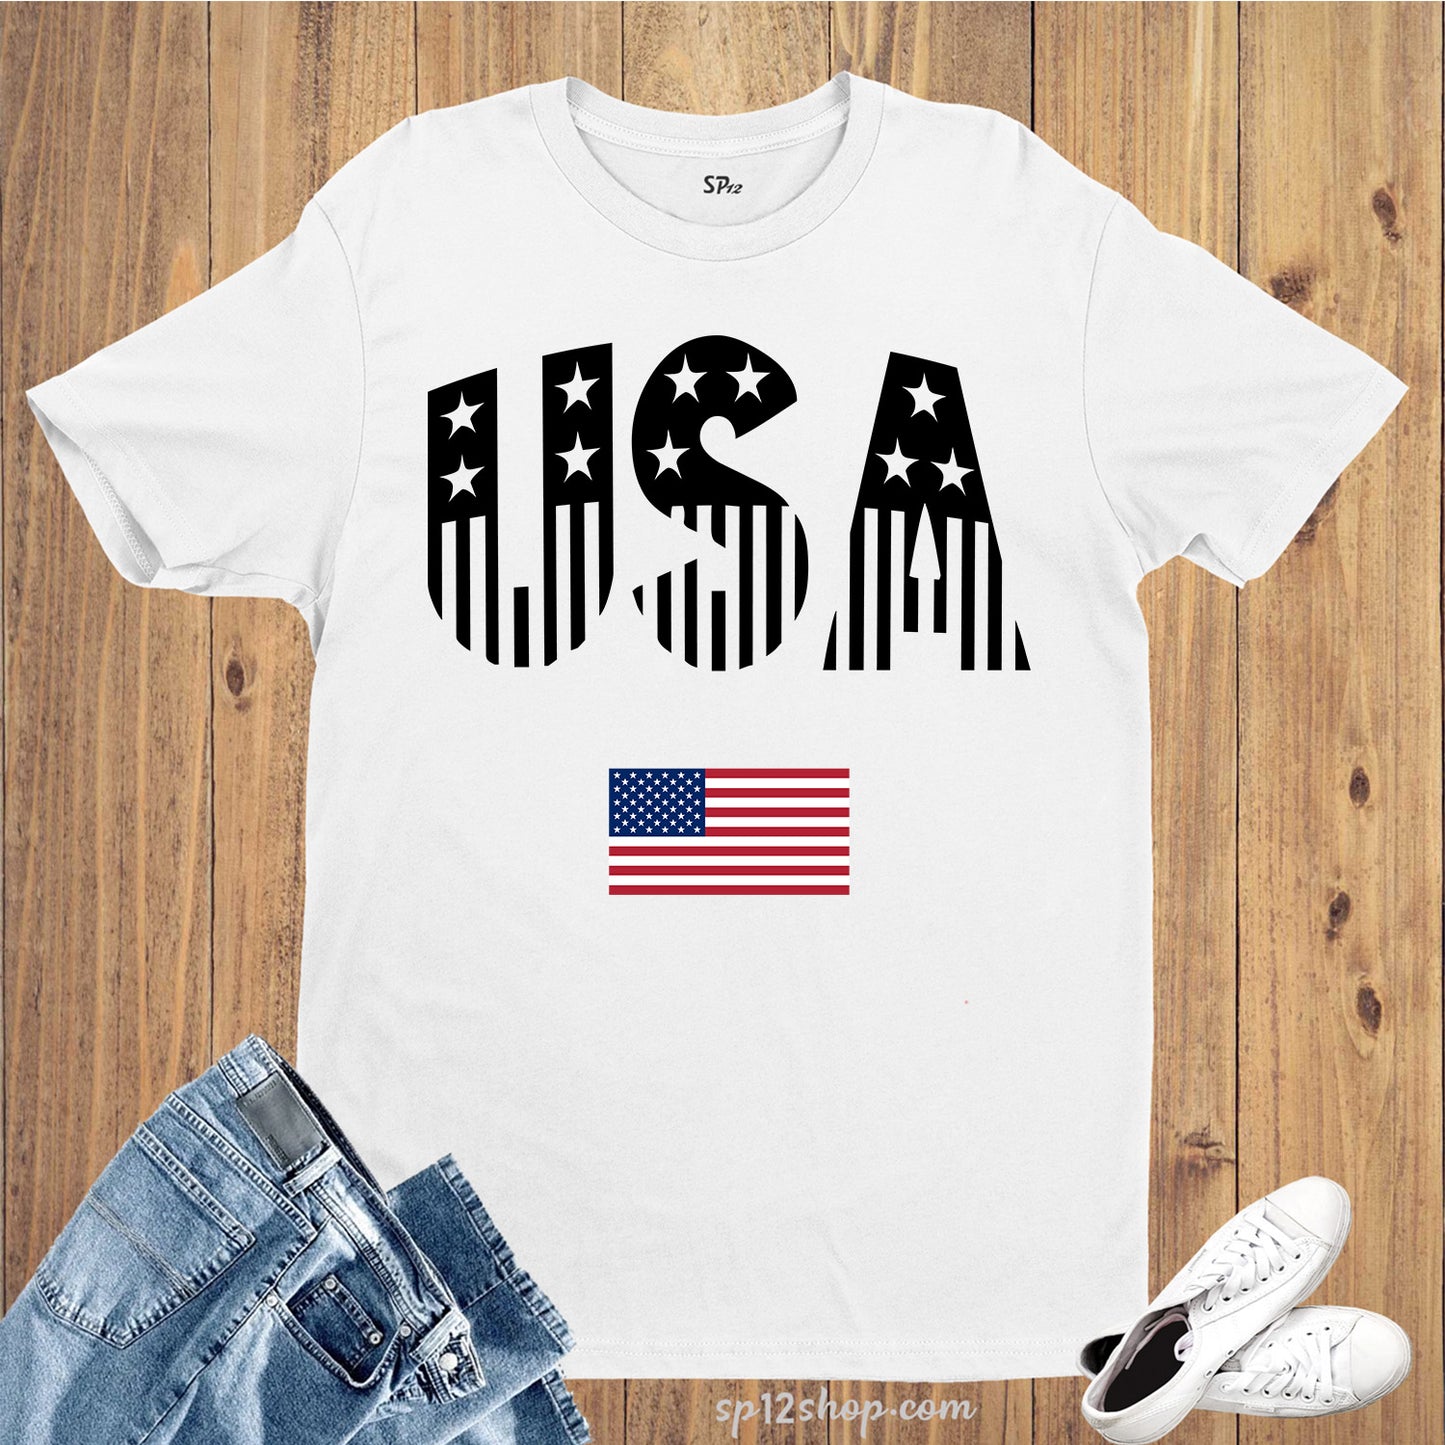 USA Flag Lips 4th of July Patriotic Day and Independence Day T Shirt